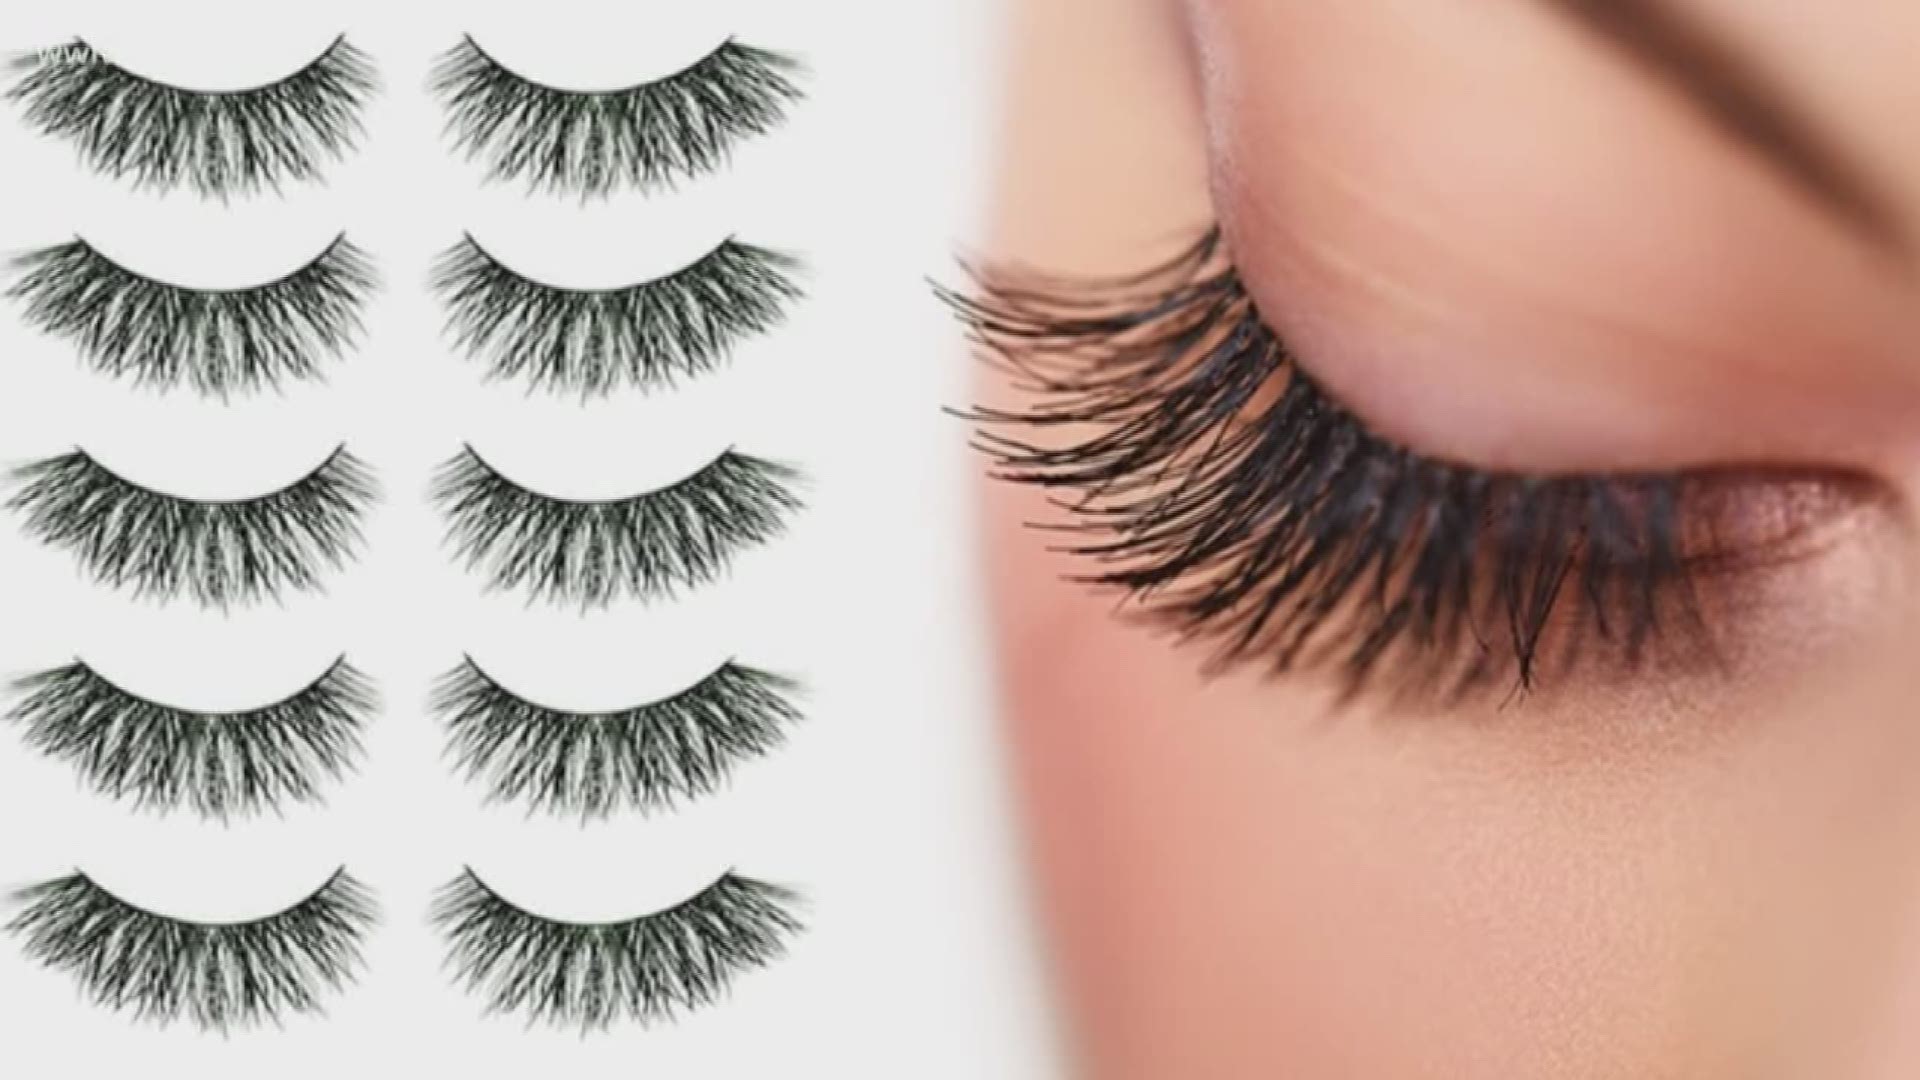 According to ICE, counterfeit contact lenses, makeup and other cosmetics often contain lead or other toxins that pose a significant consumer safety risk.